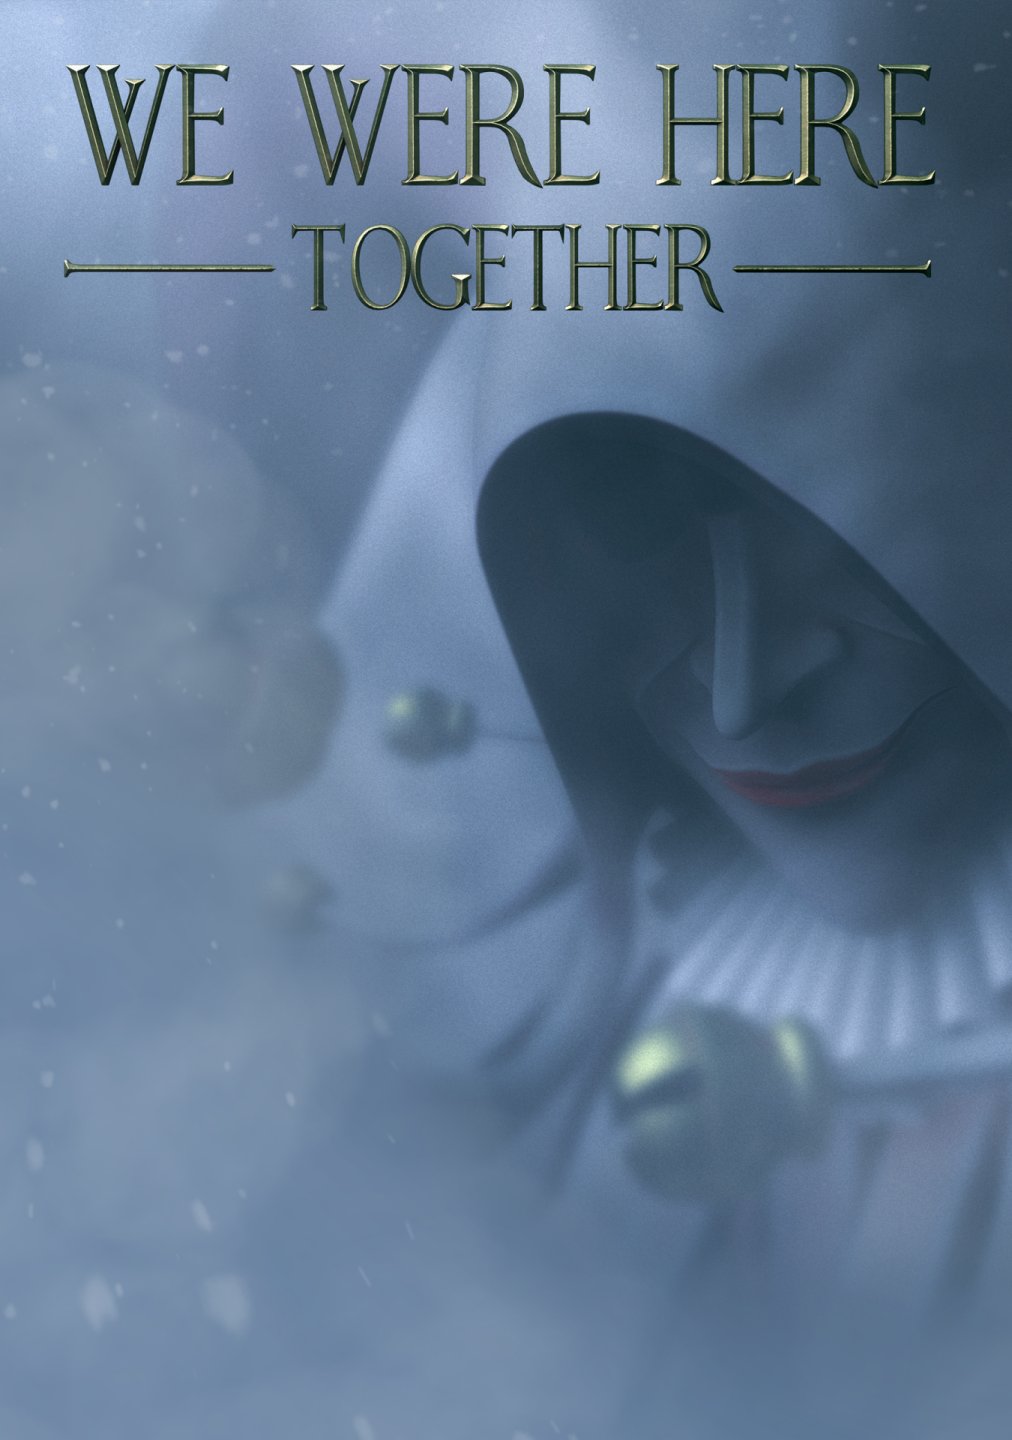 we were here together switch download free